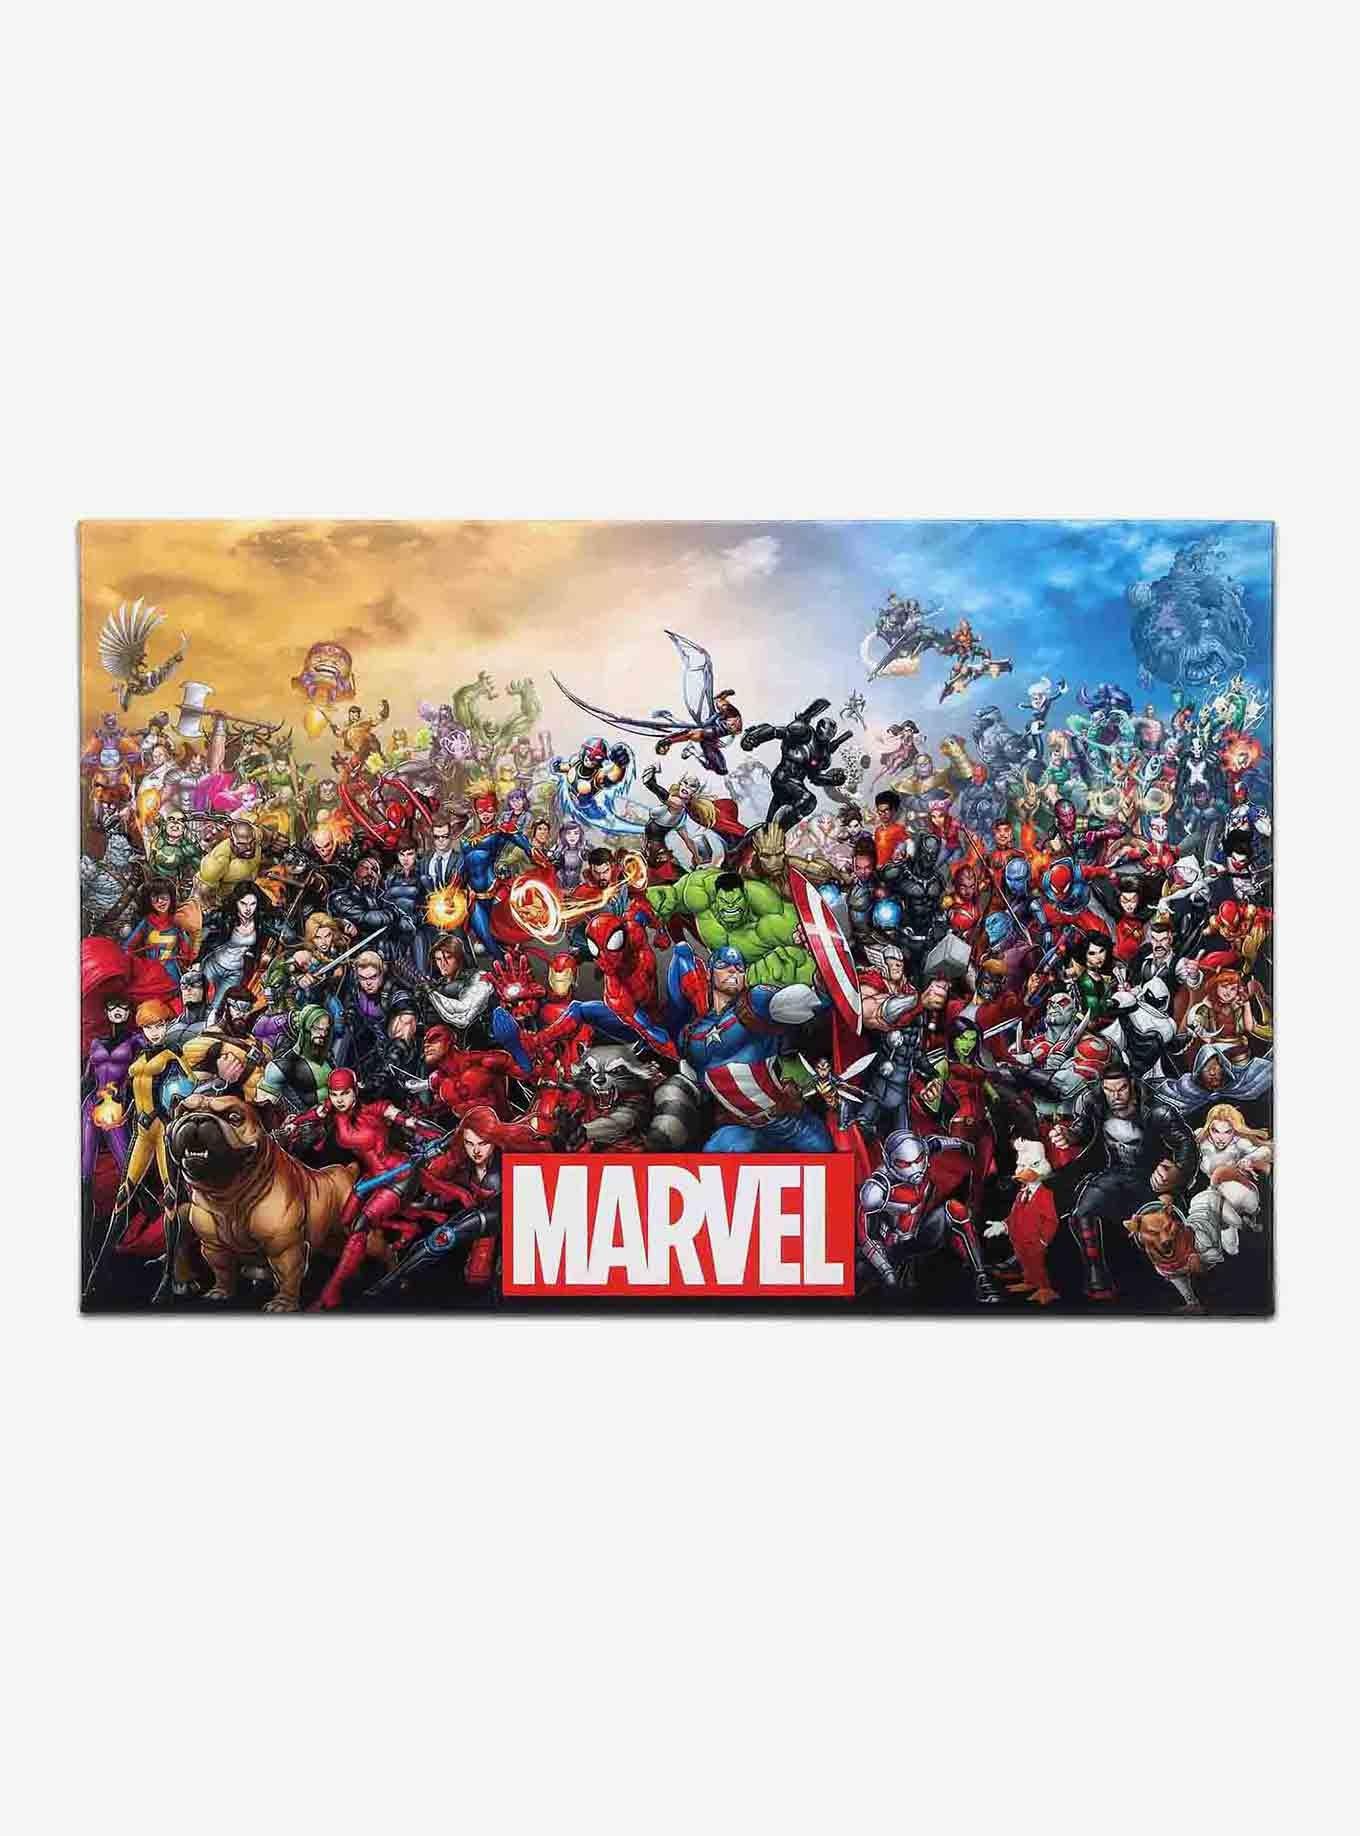 Marvel Heroes Attack Comic Book Cool Wall Decor Art Print Poster